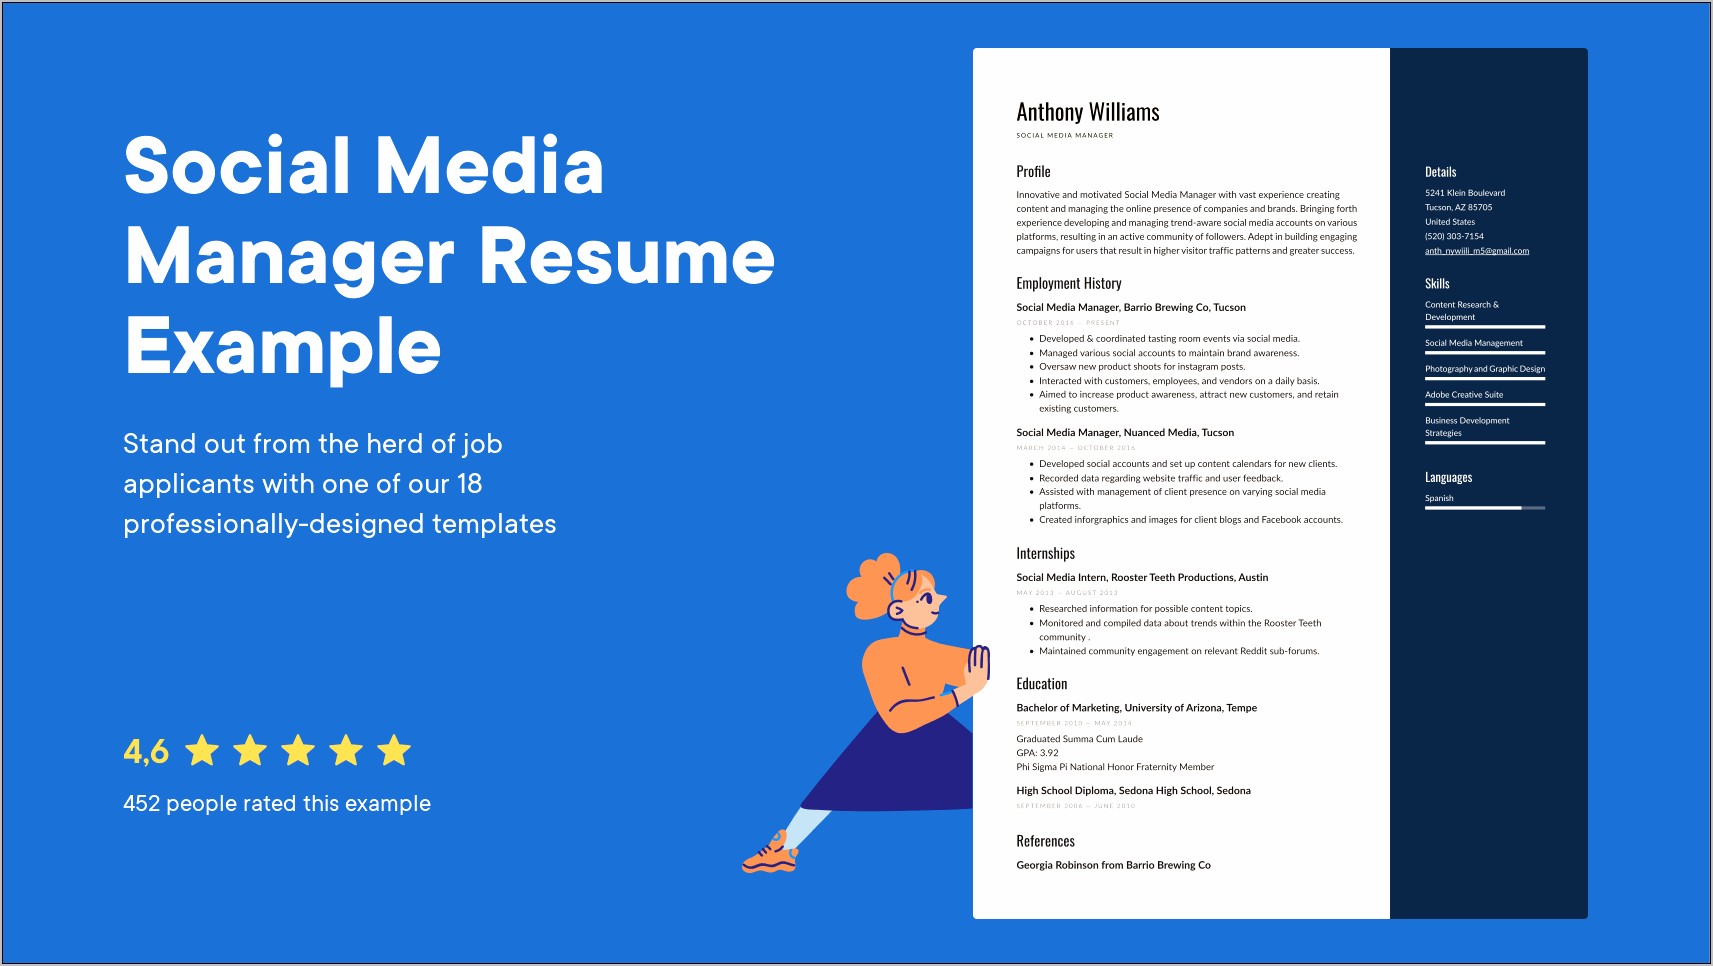 Describe Your Computer Skills Resume Soical Media Sample